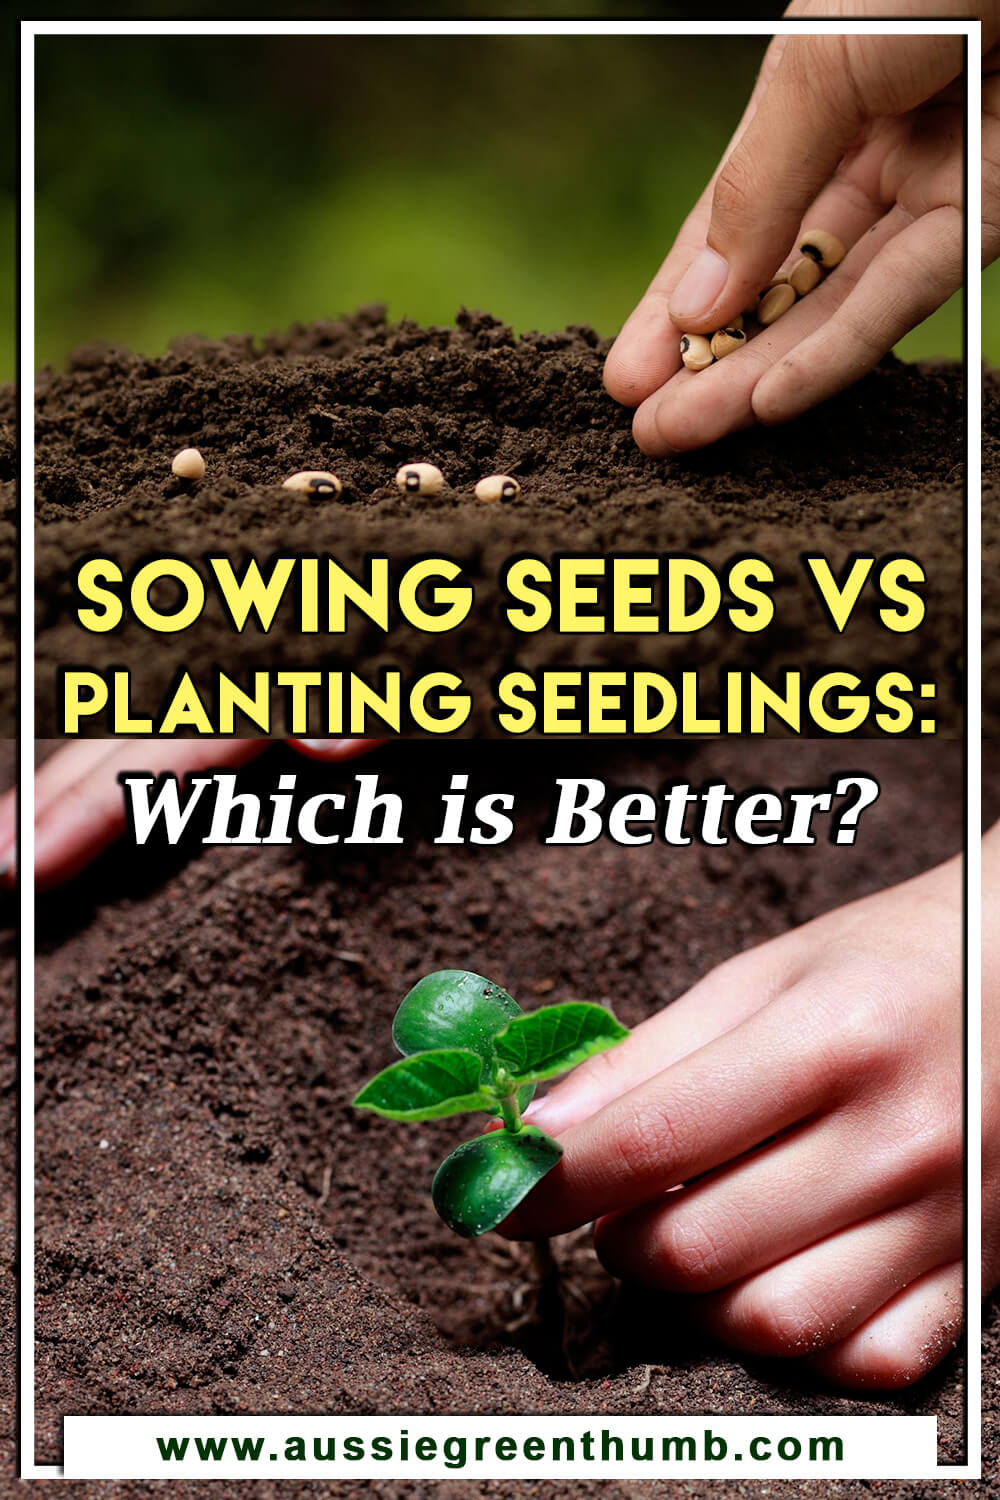 Sowing Seeds vs Planting Seedlings: Which is Better?